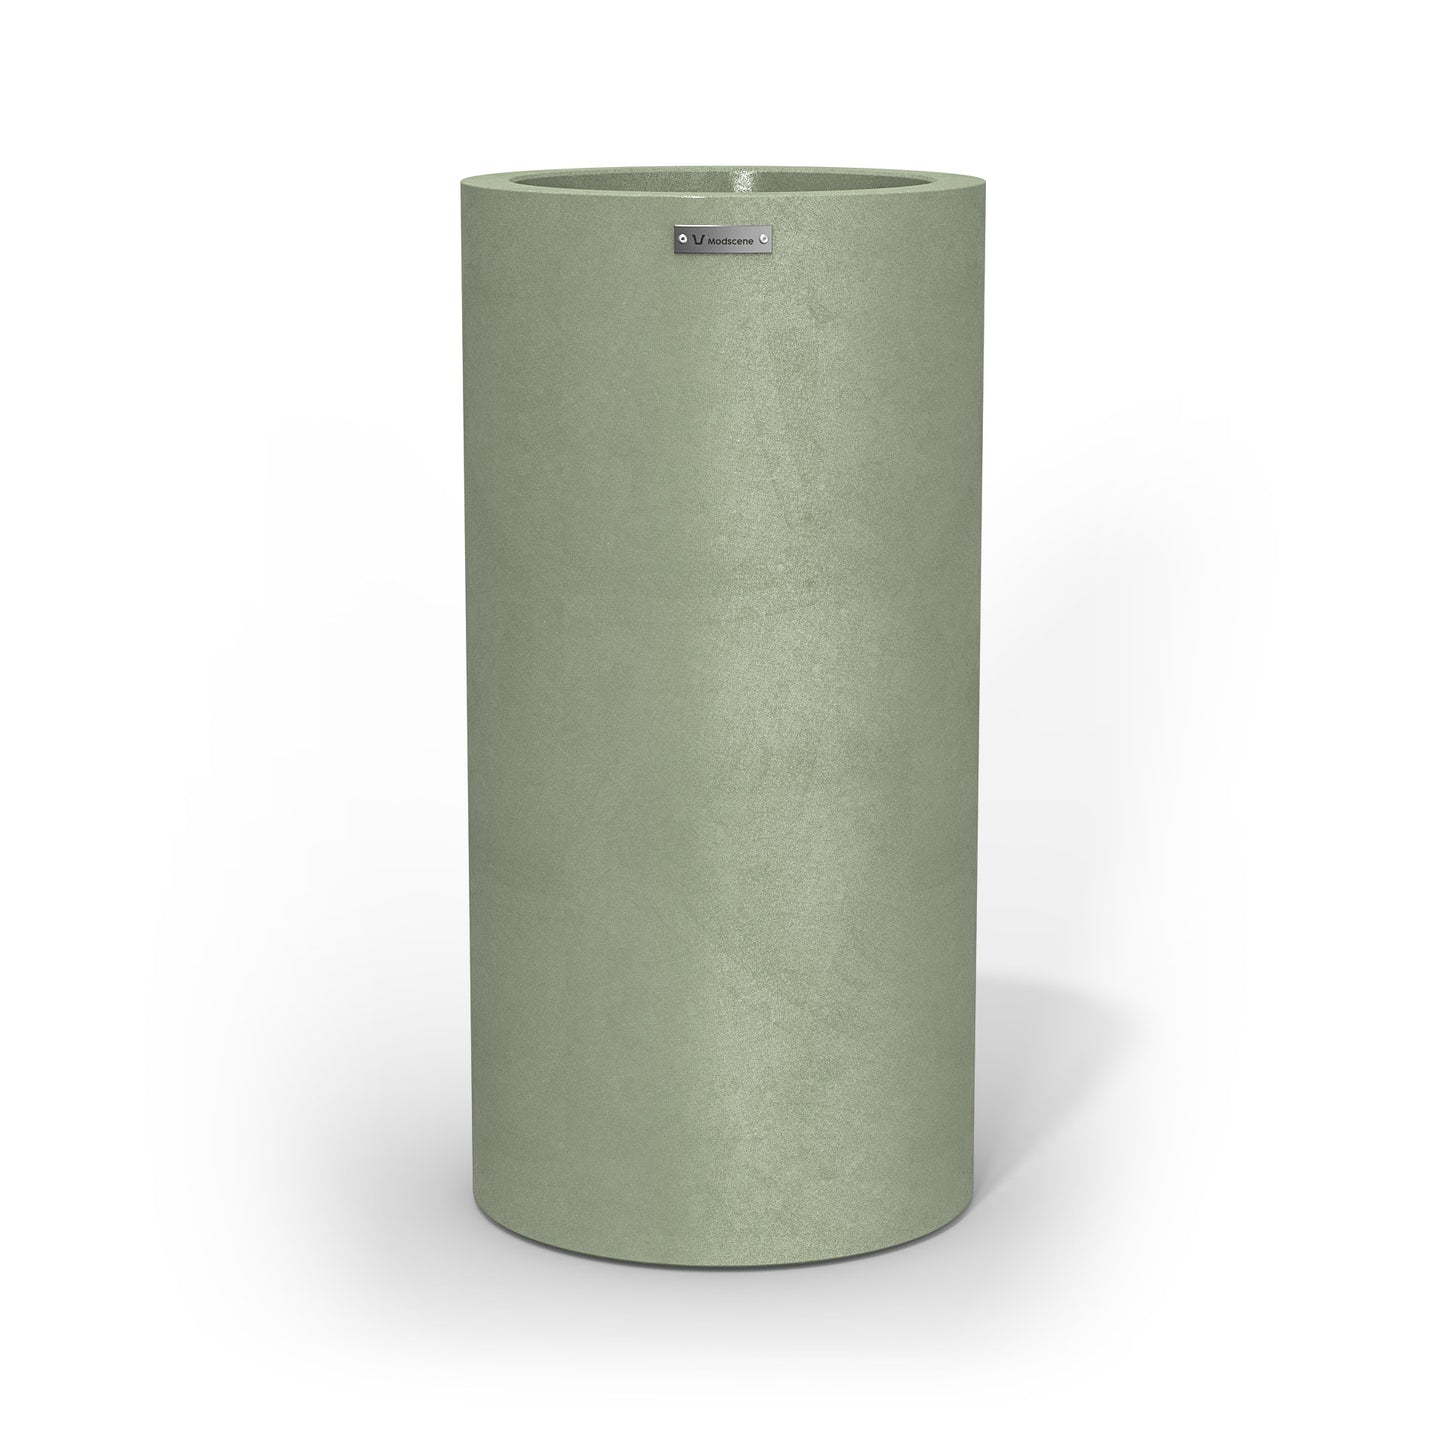 A large cigar cylinder pot planter in a sage green made by Modscene NZ.